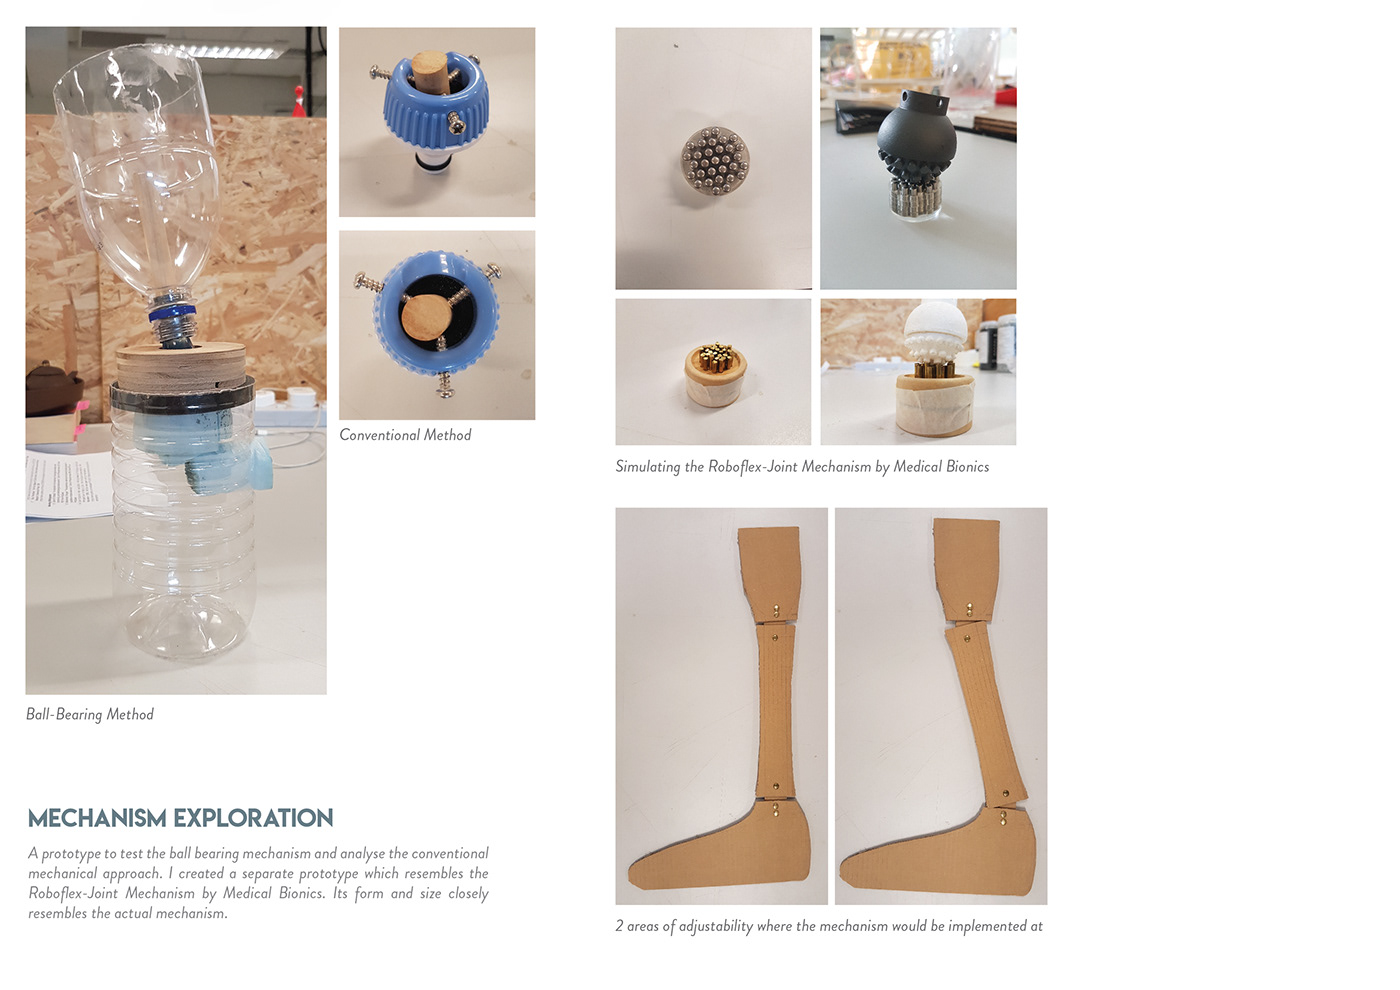 Prosthesis prosthetic amputee amputation alignment transtibial leg product industrial design